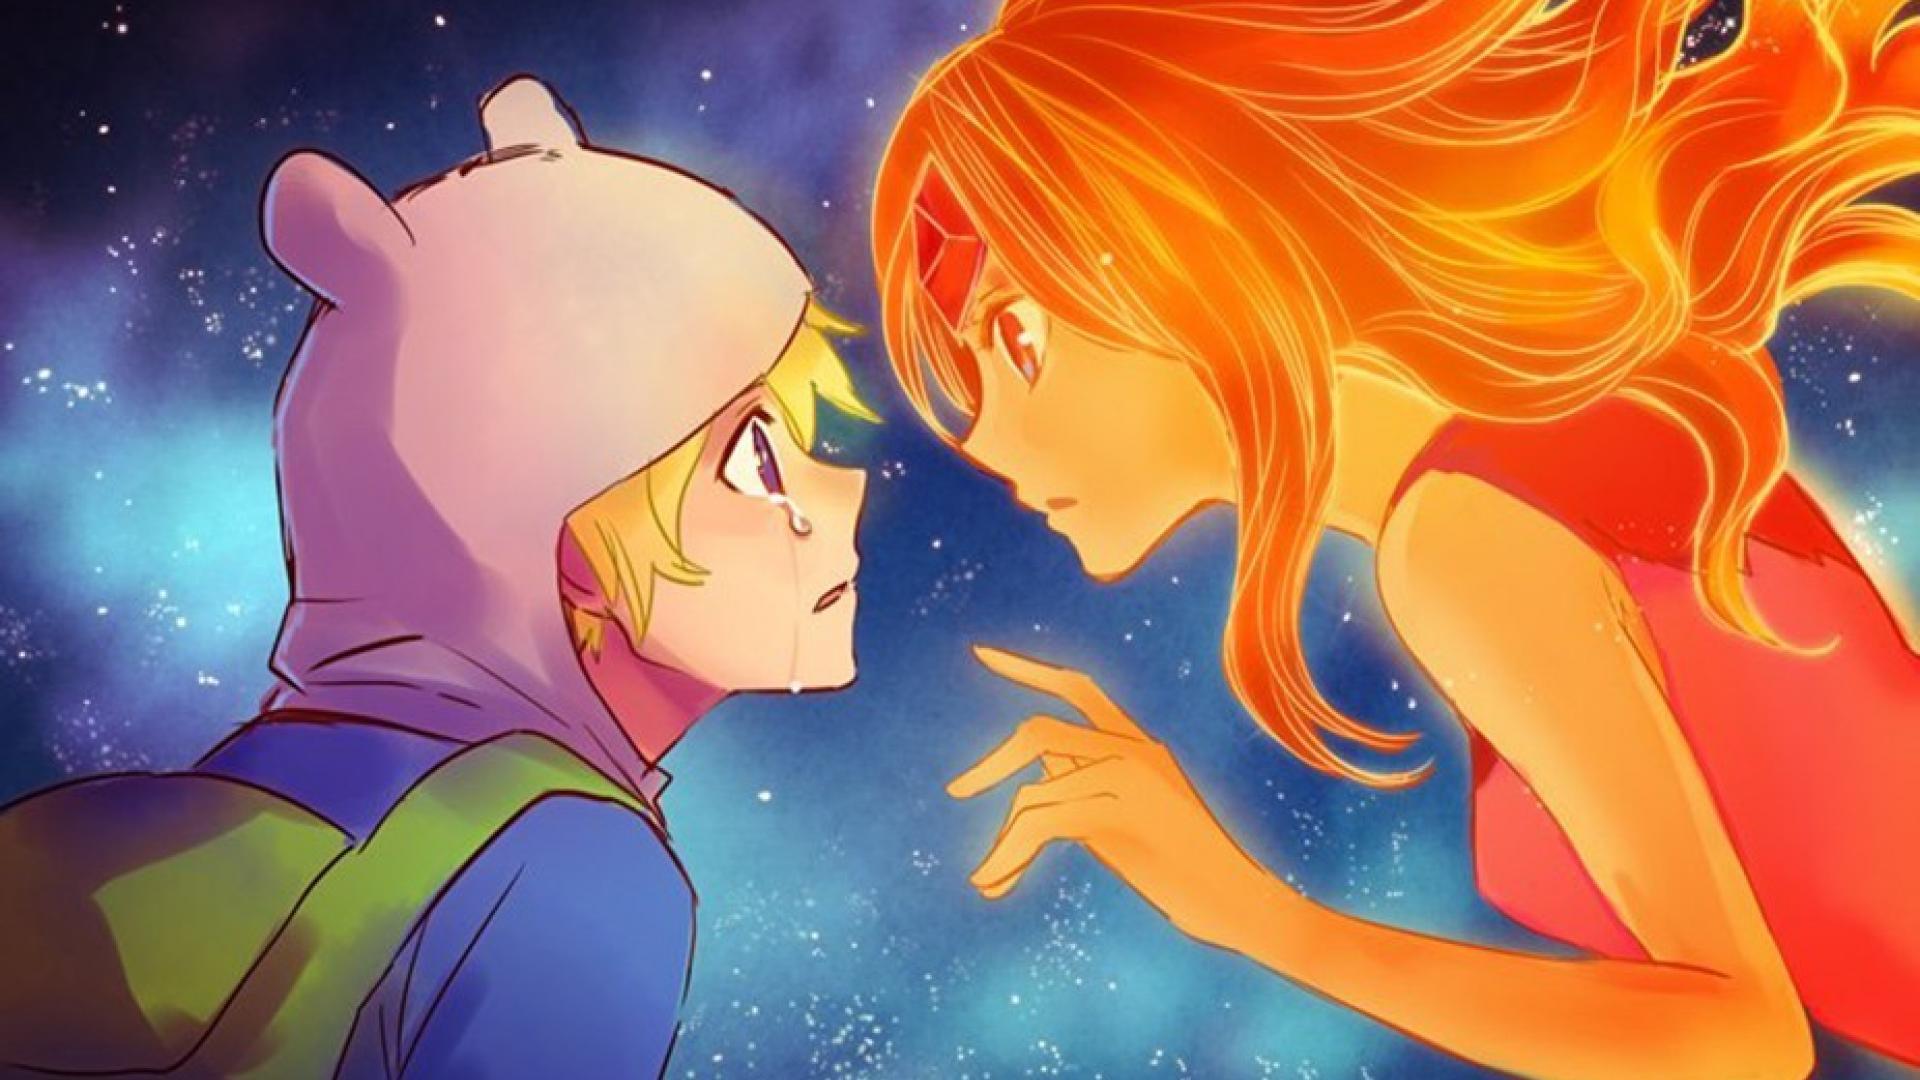 Adventure Time 10 Finn Fan Art Pictures You Need To See